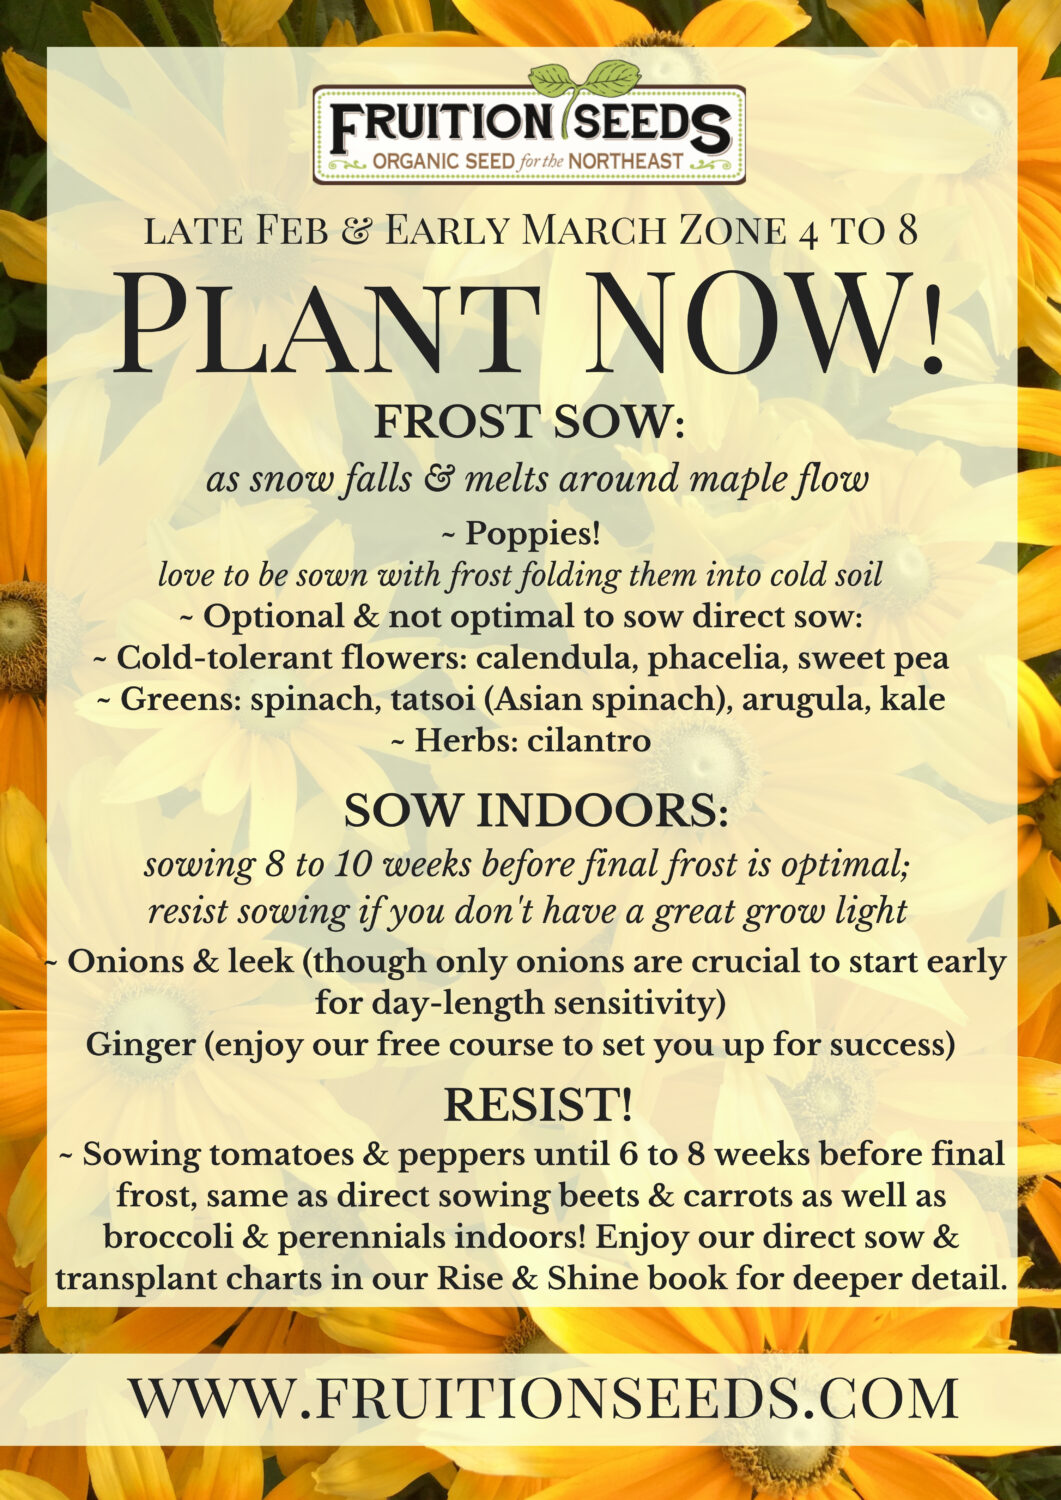 Thumbnail of Growing Guide for February Plant Now